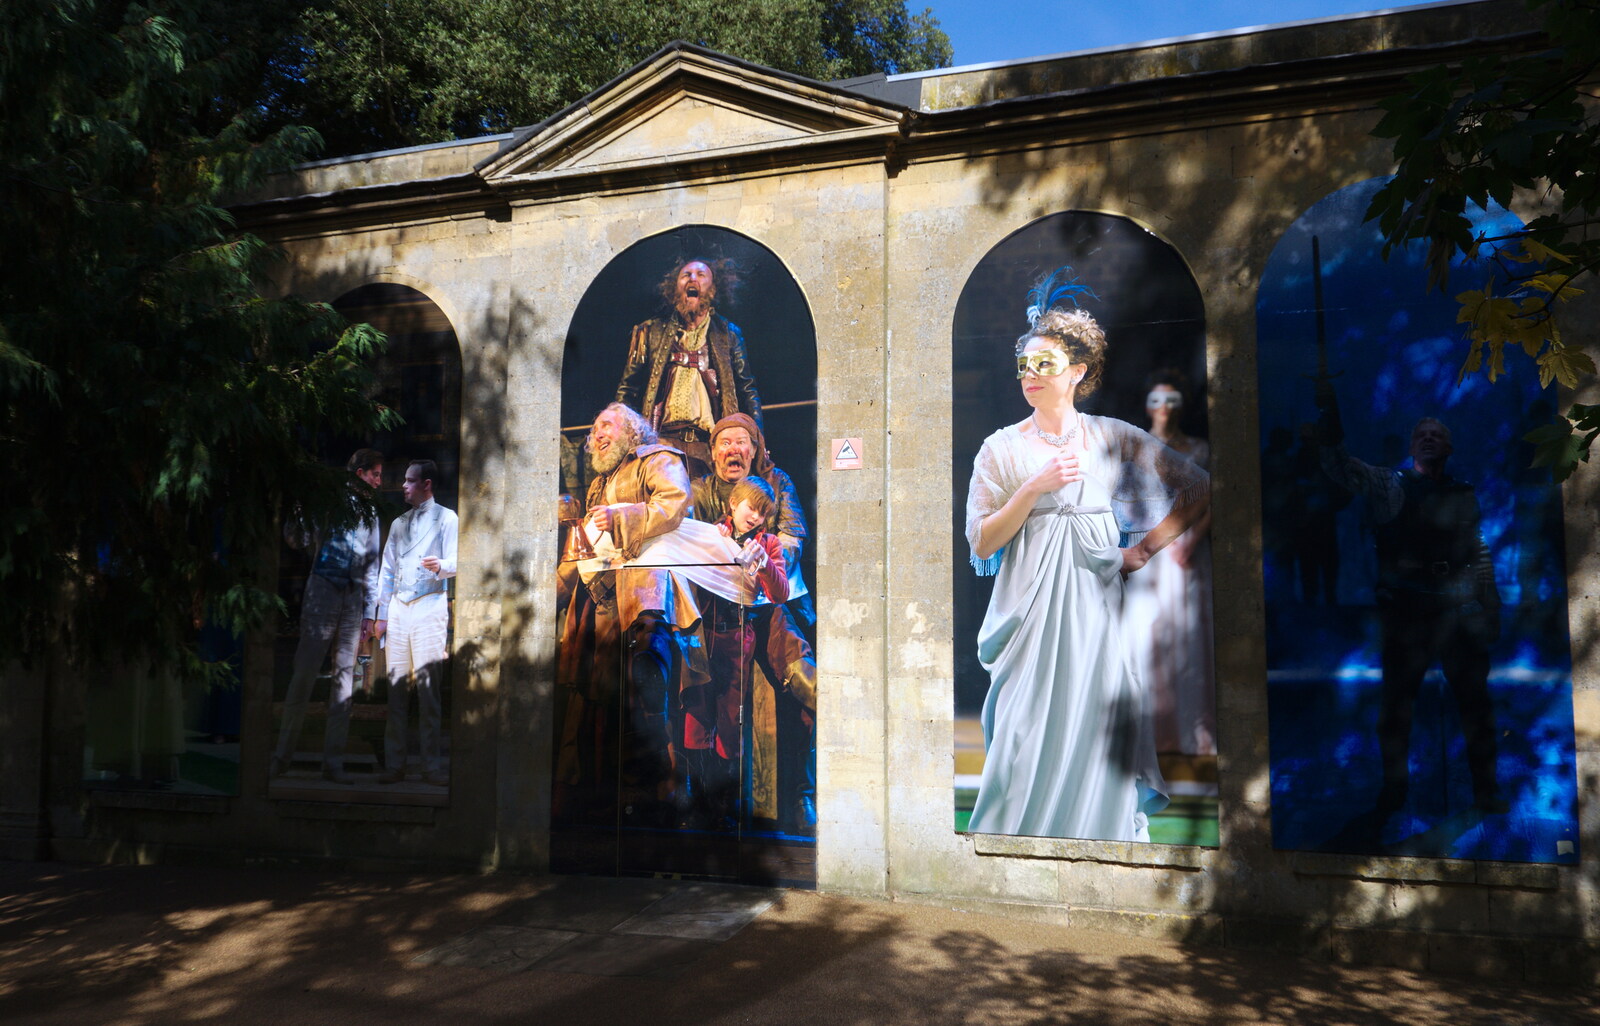 Murals in a park from A Boat Trip on the River, Stratford upon Avon, Warwickshire - 14th September 2019